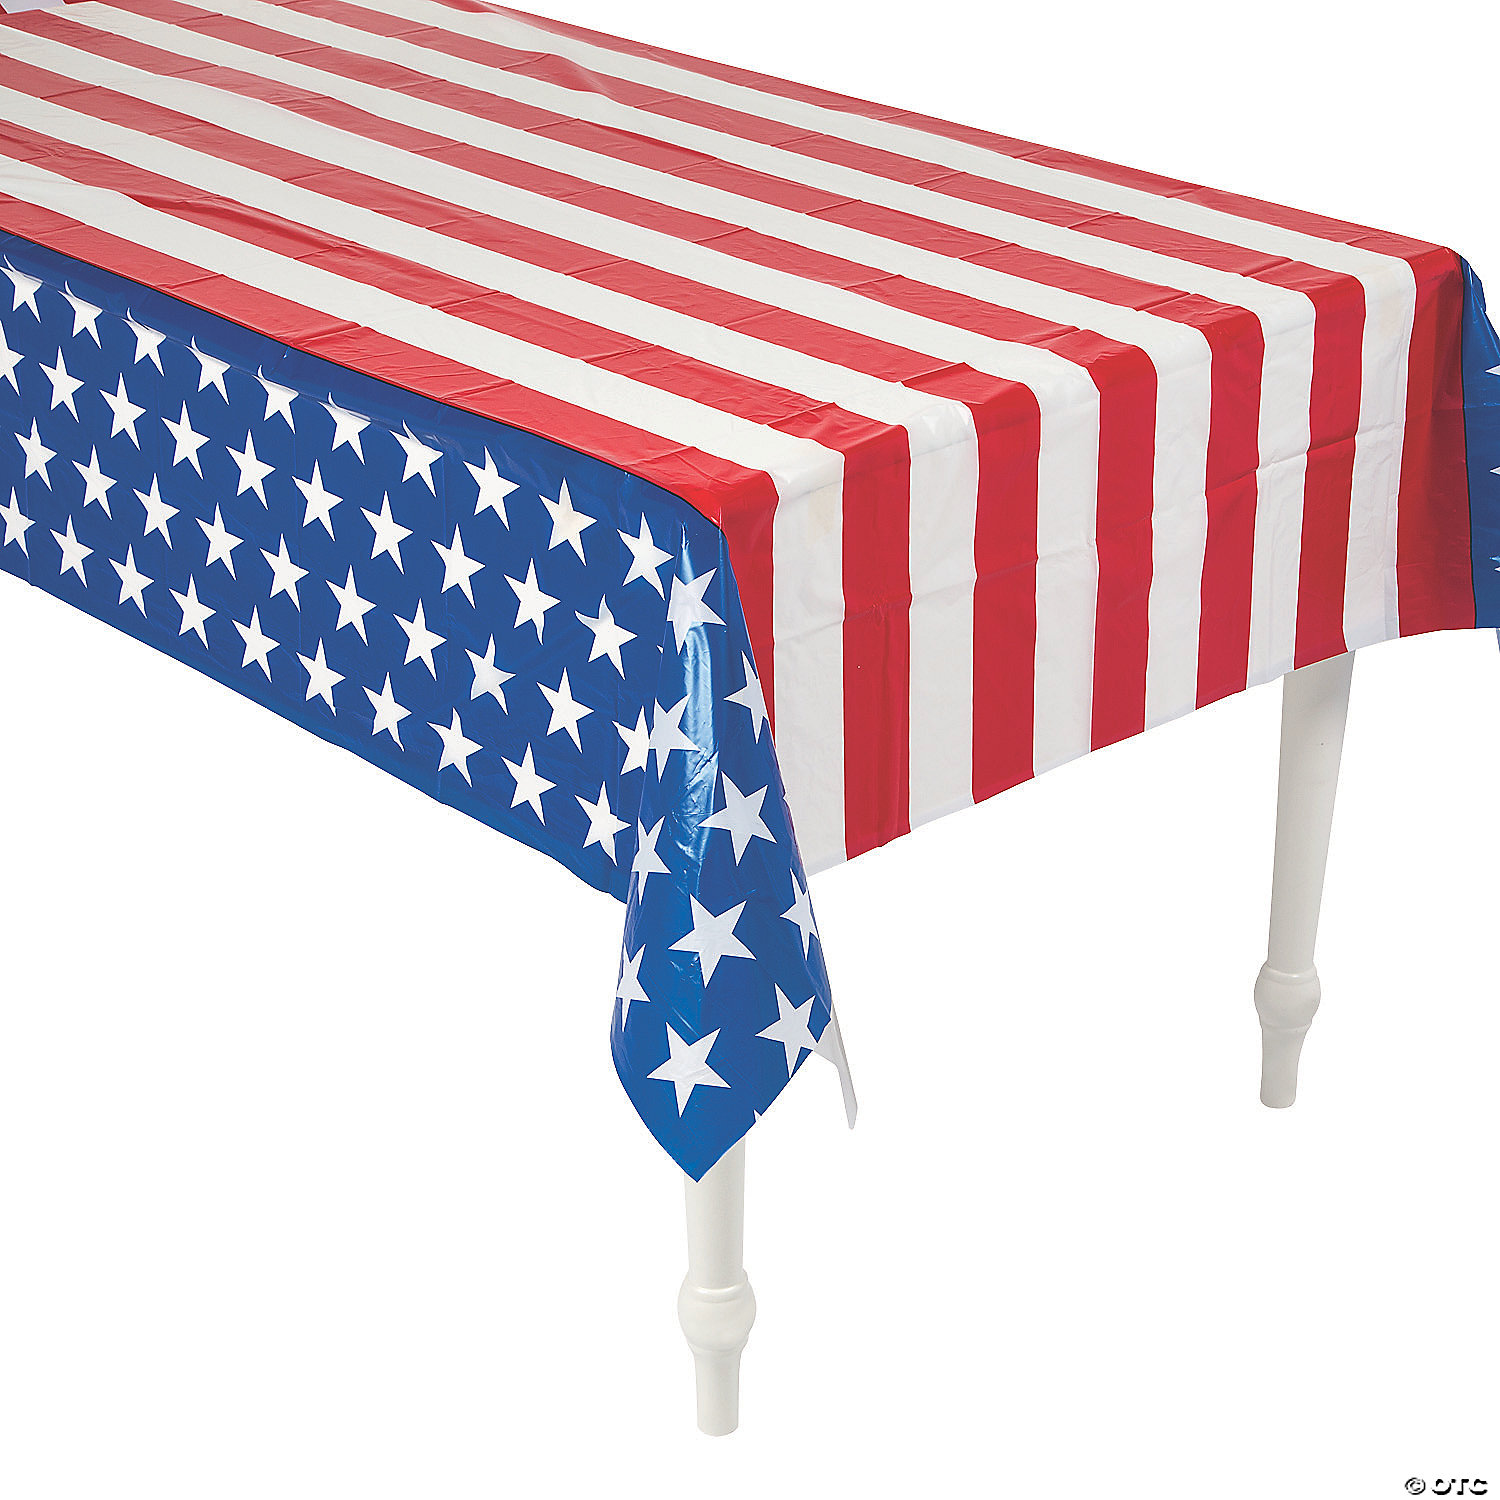 SUMMER PICNIC 54"x108" Plastic TABLE COVER Patriotic 4TH OF JULY New*YOU CHOOSE* 